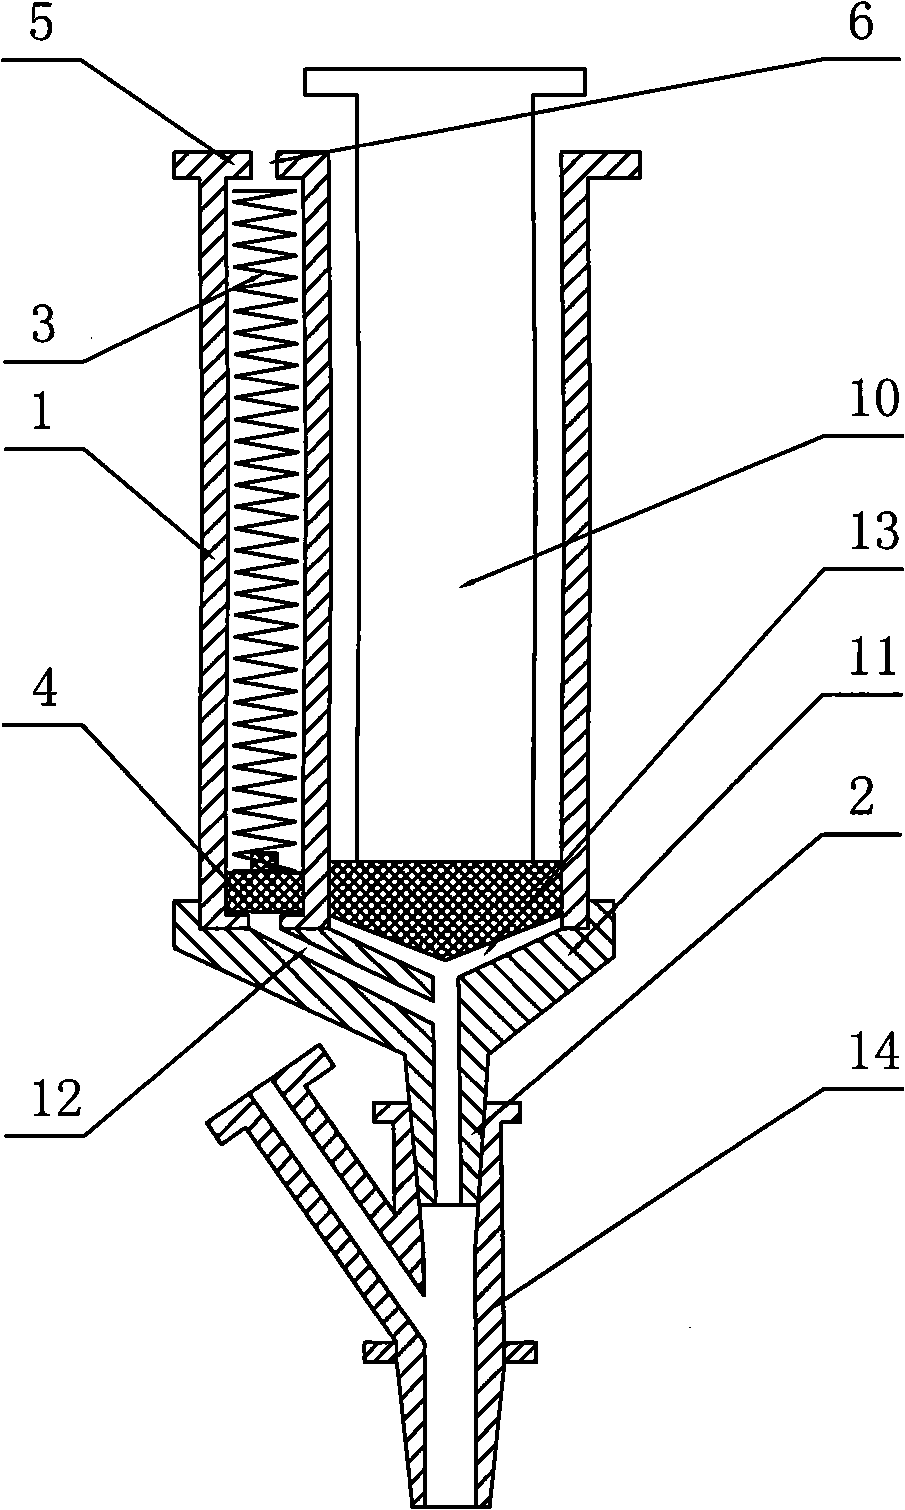 Device for deep venipuncture permanent needle capable of accurately recognizing artery and vein